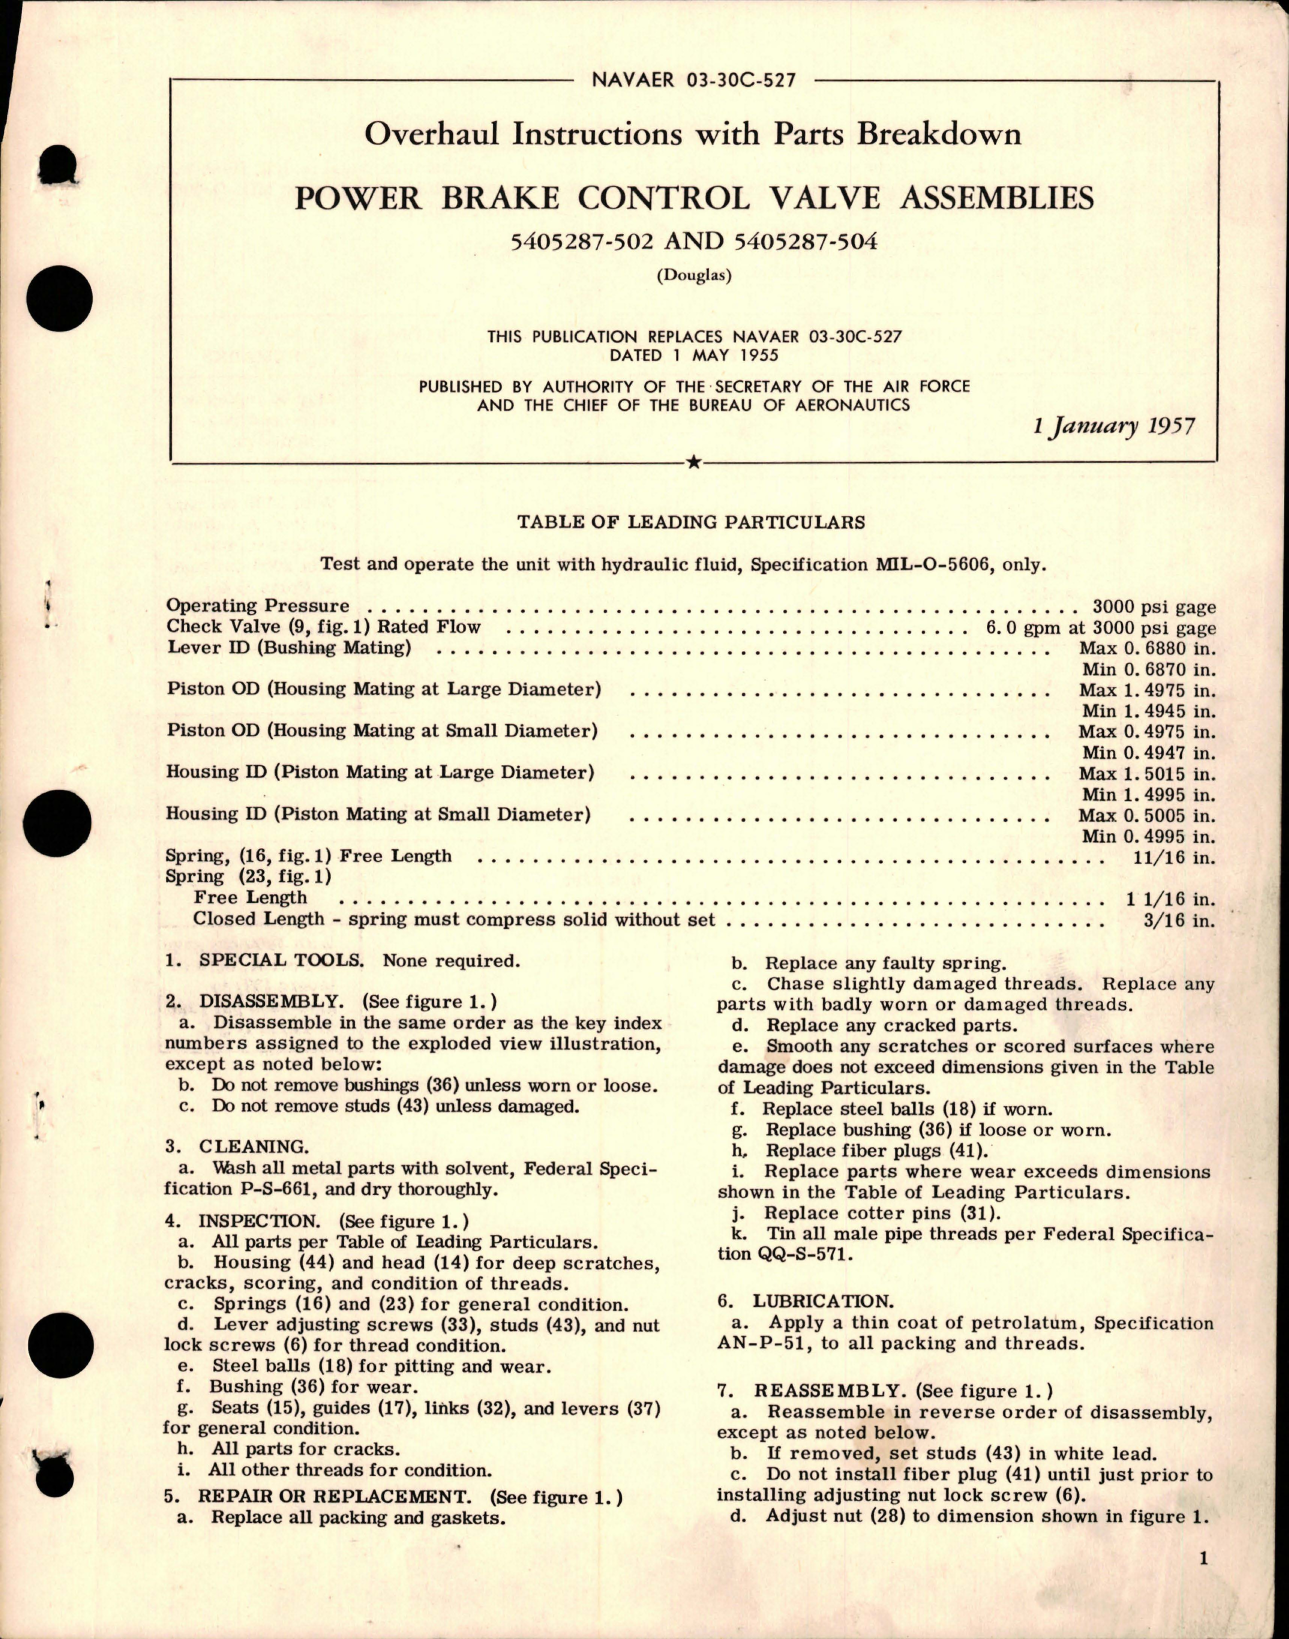 Sample page 1 from AirCorps Library document: Overhaul Instructions with Parts for Power Brake Control Valve Assemblies - 5405287-502 and 5405287-504